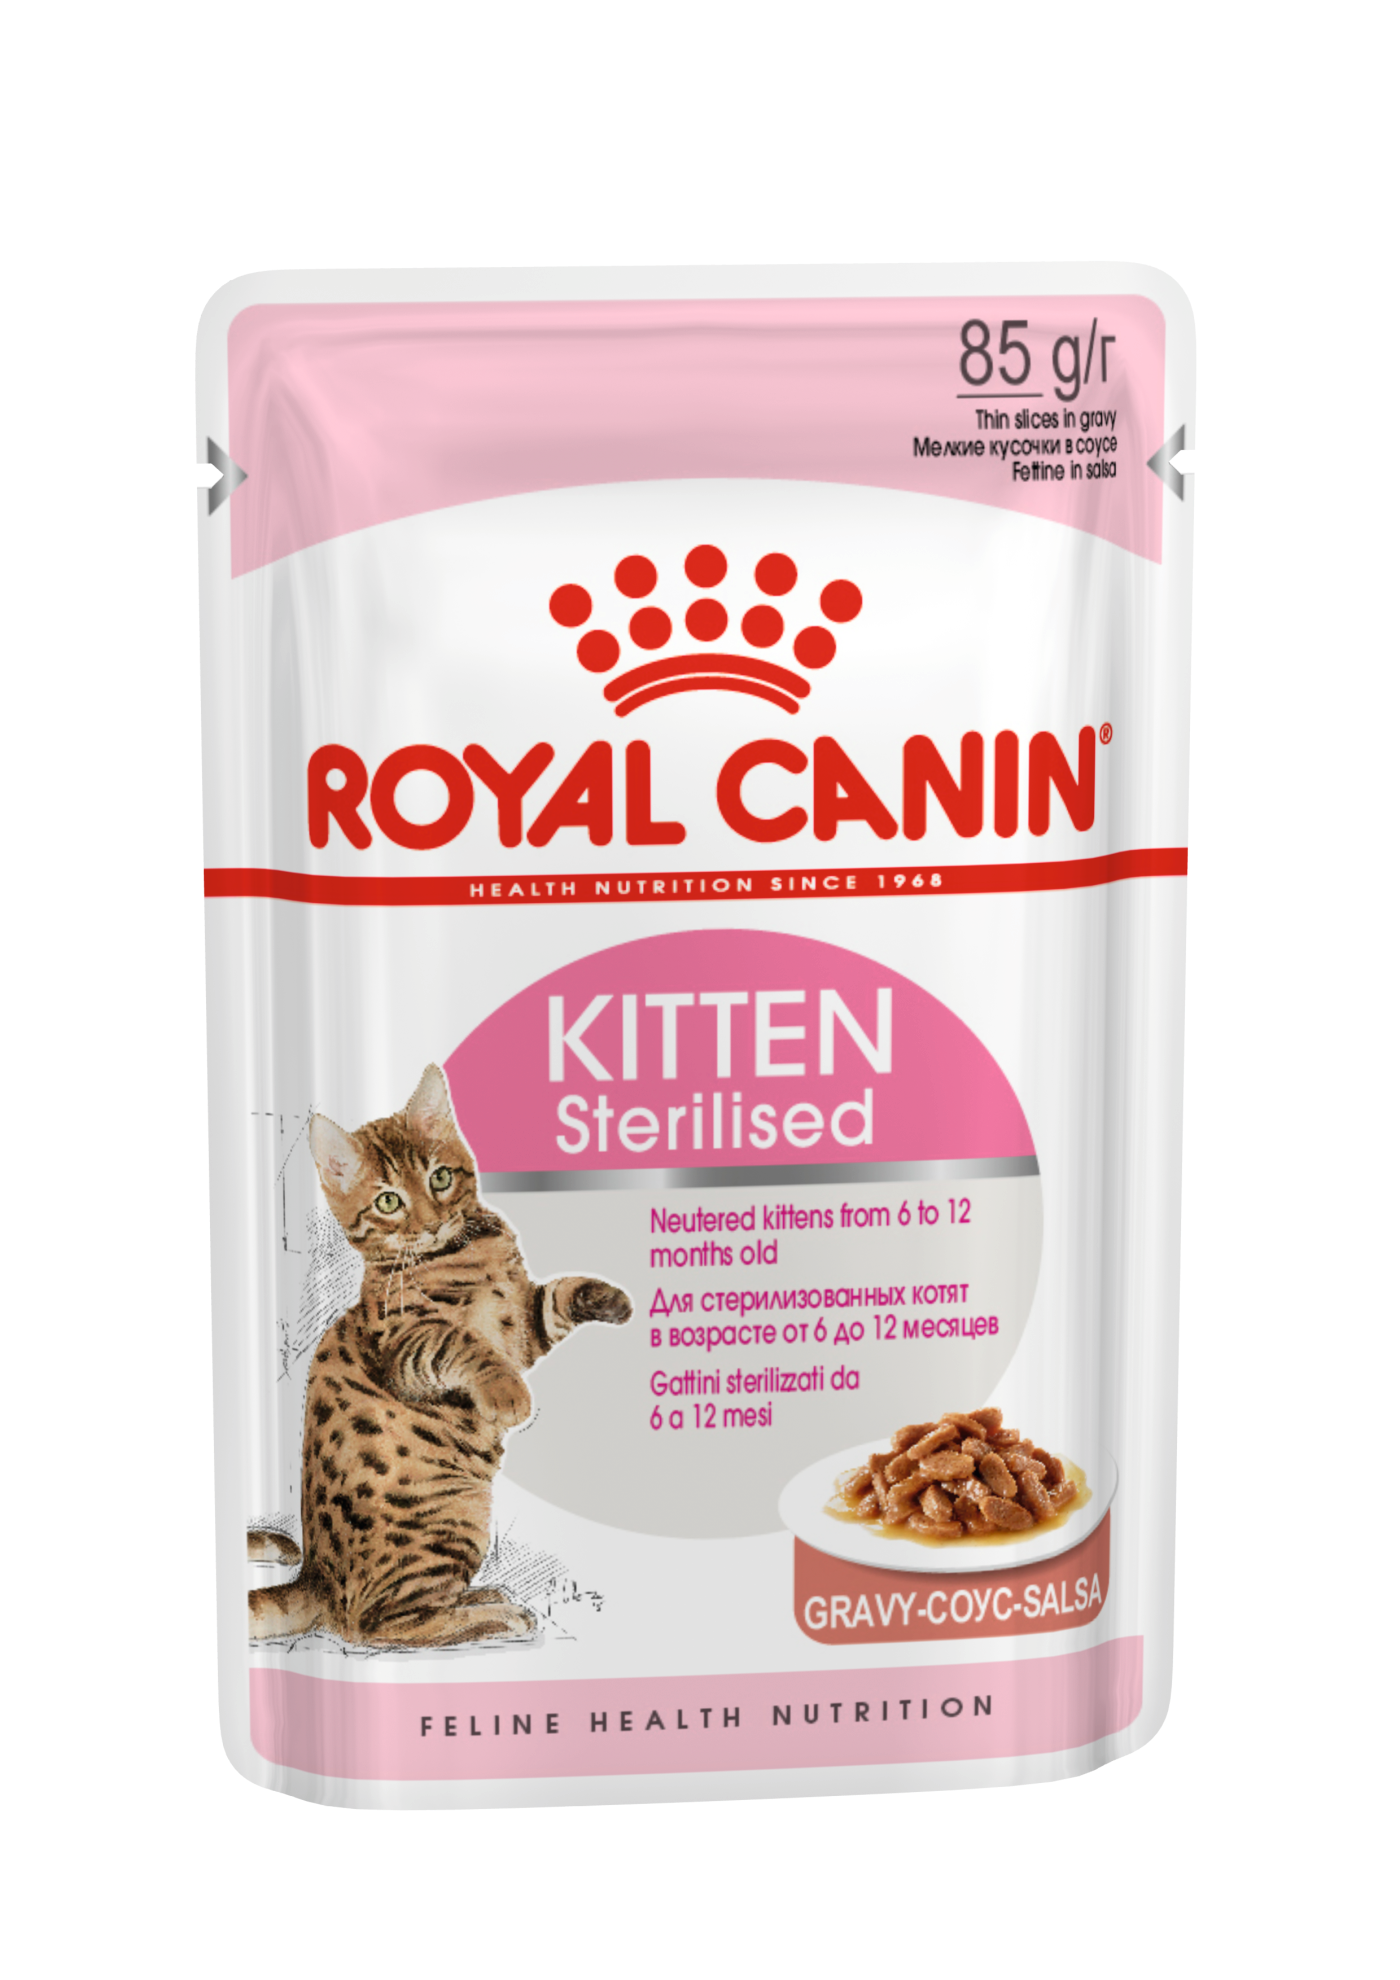 royal canin second age kitten 10 kg